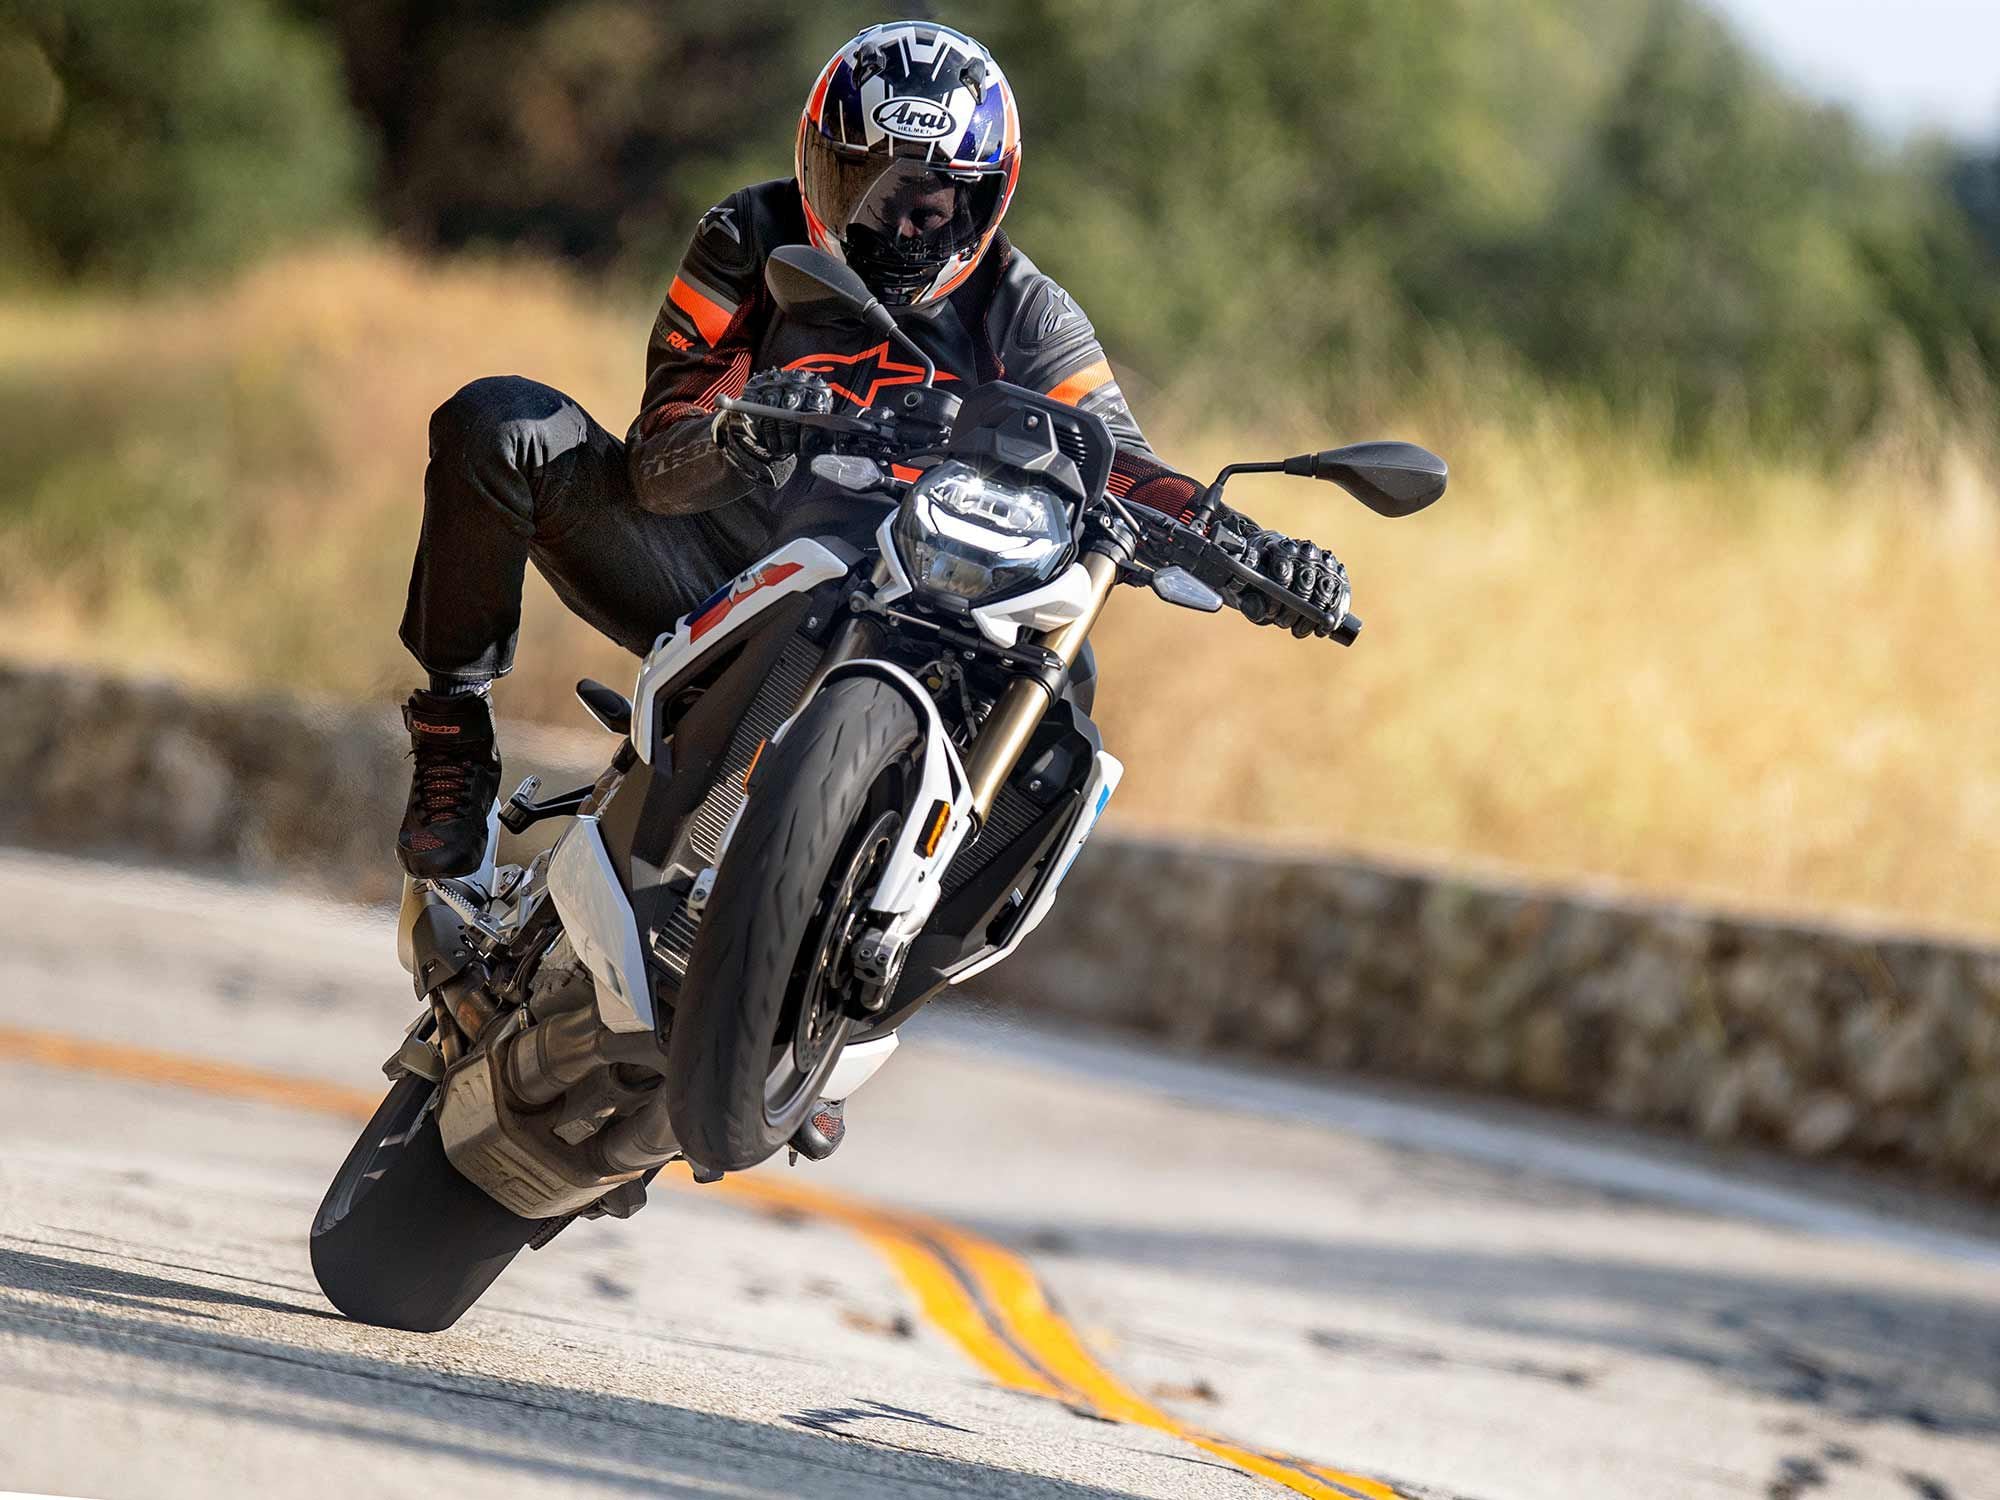 Predictable and precise: The 2022 S 1000 R M-series is extremely fun even with the electronic rider aids on.